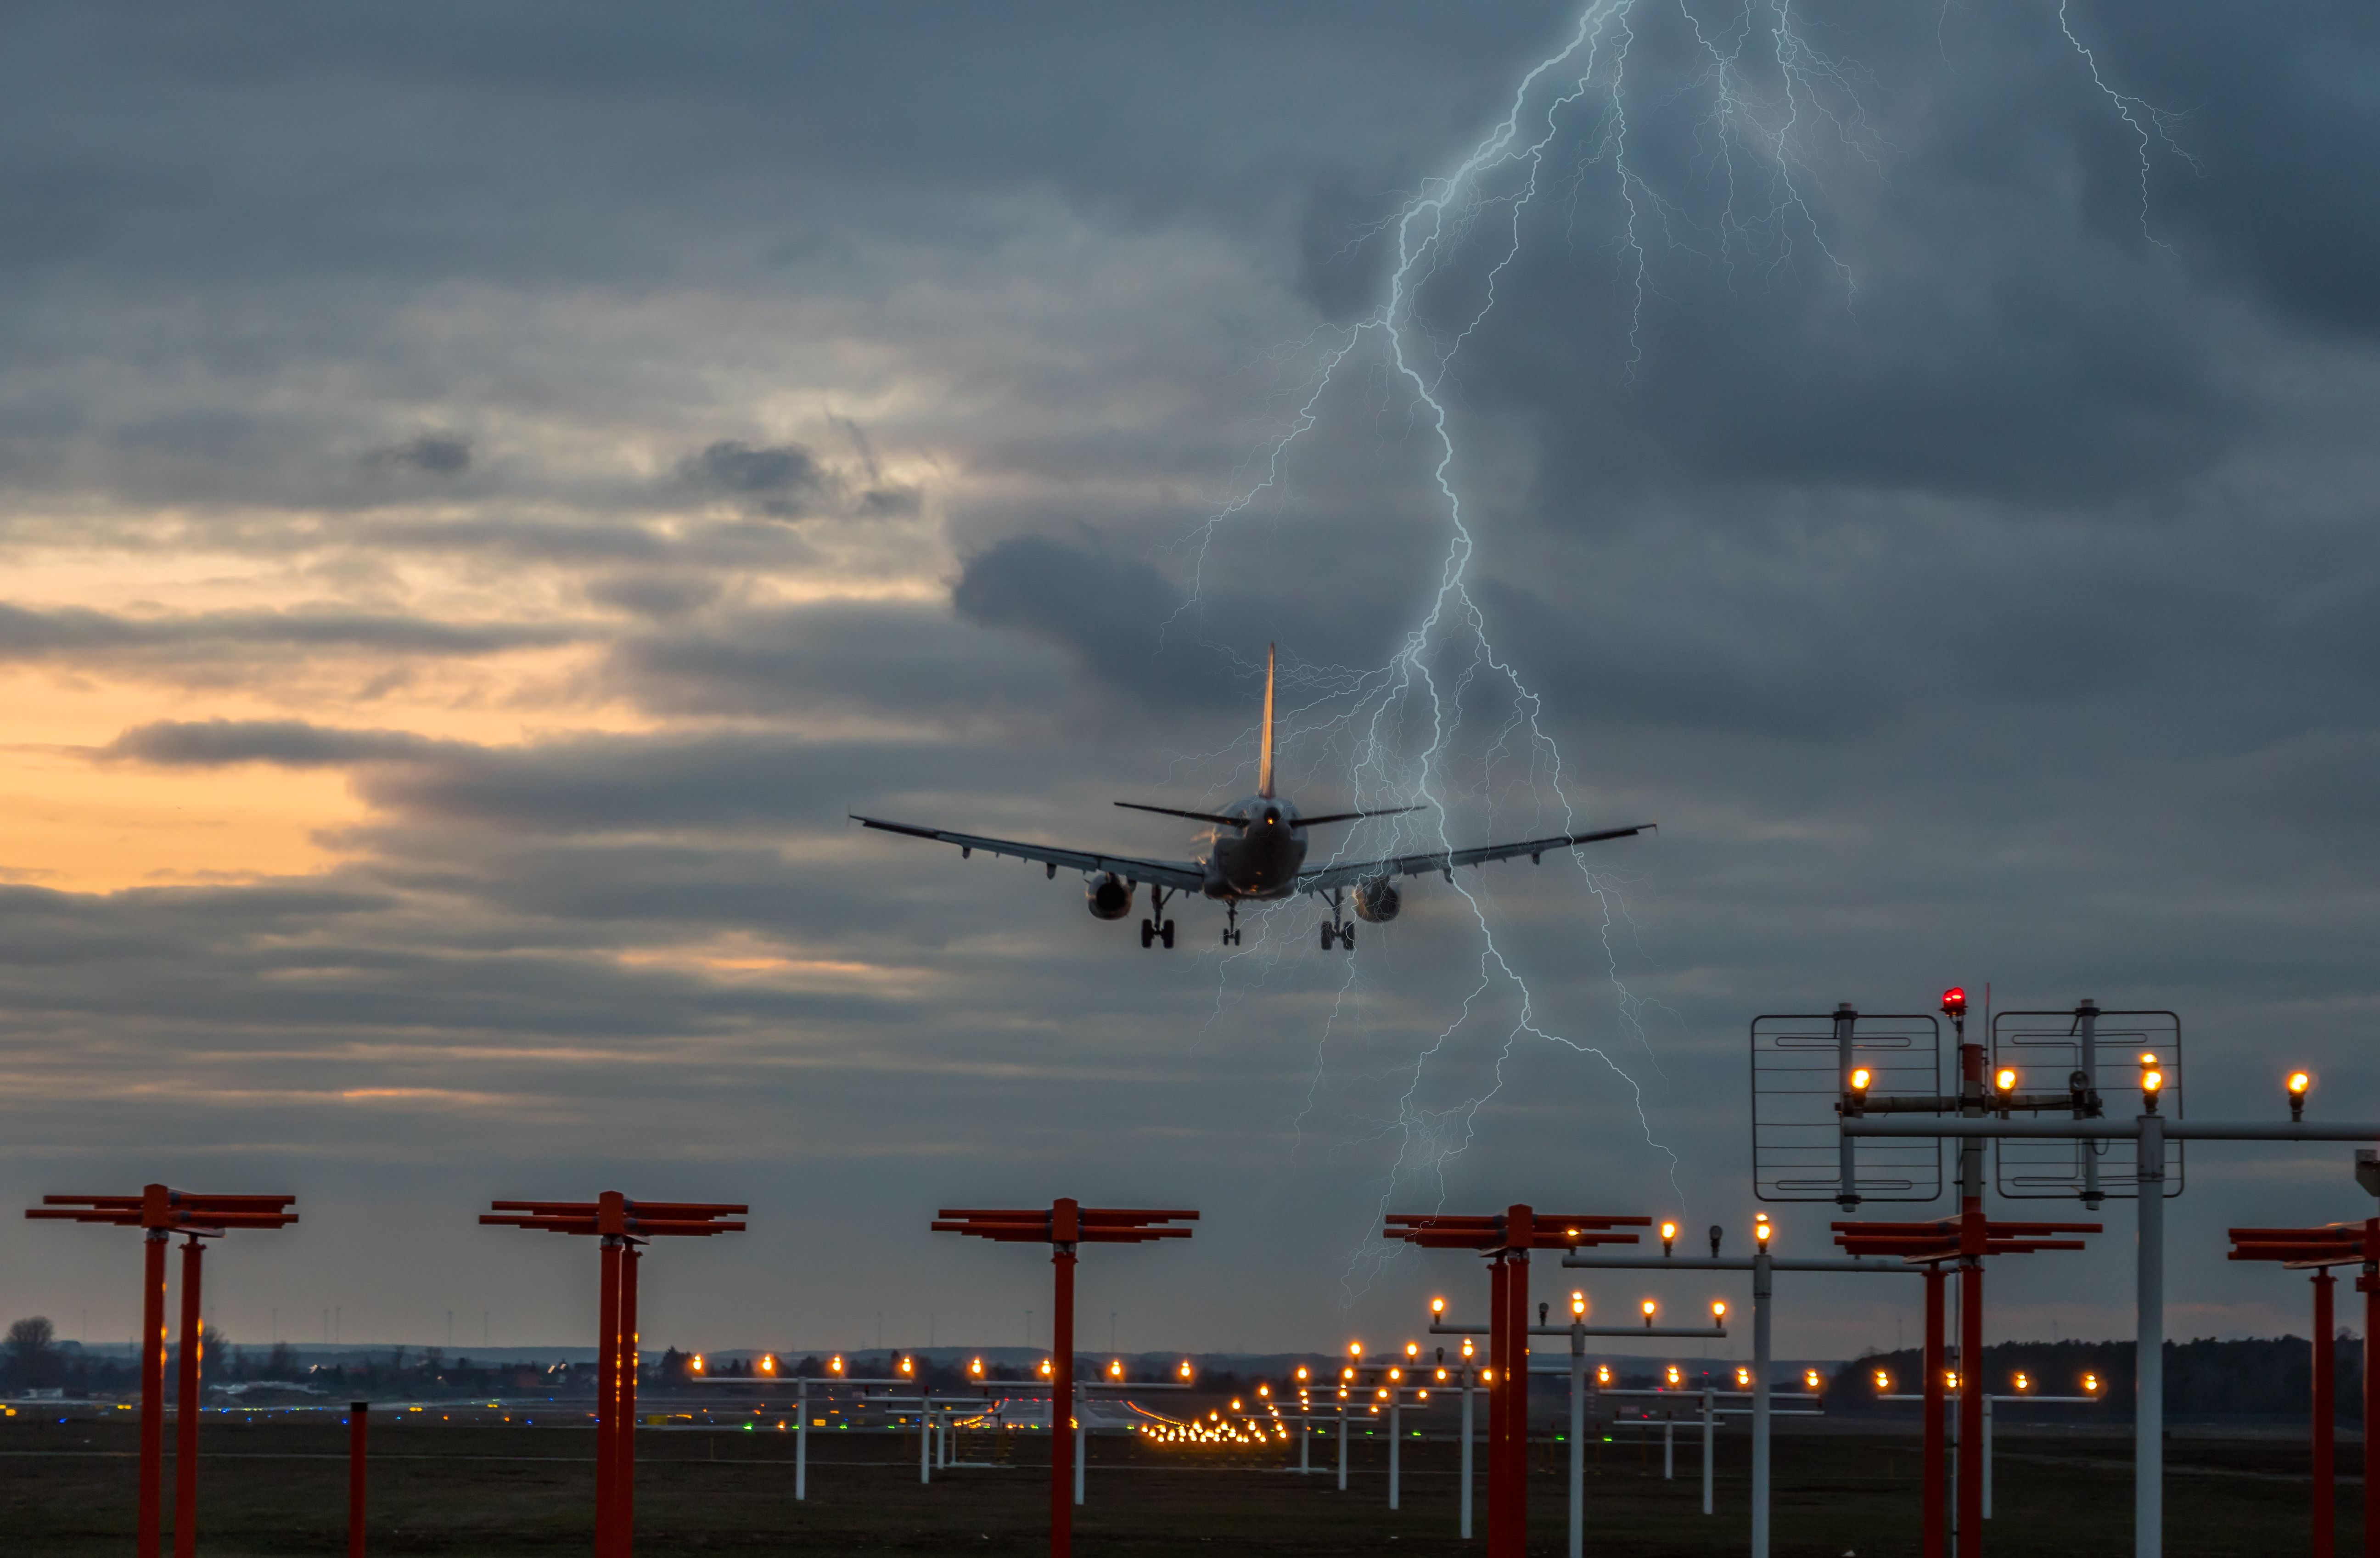 aircraft landing in storm